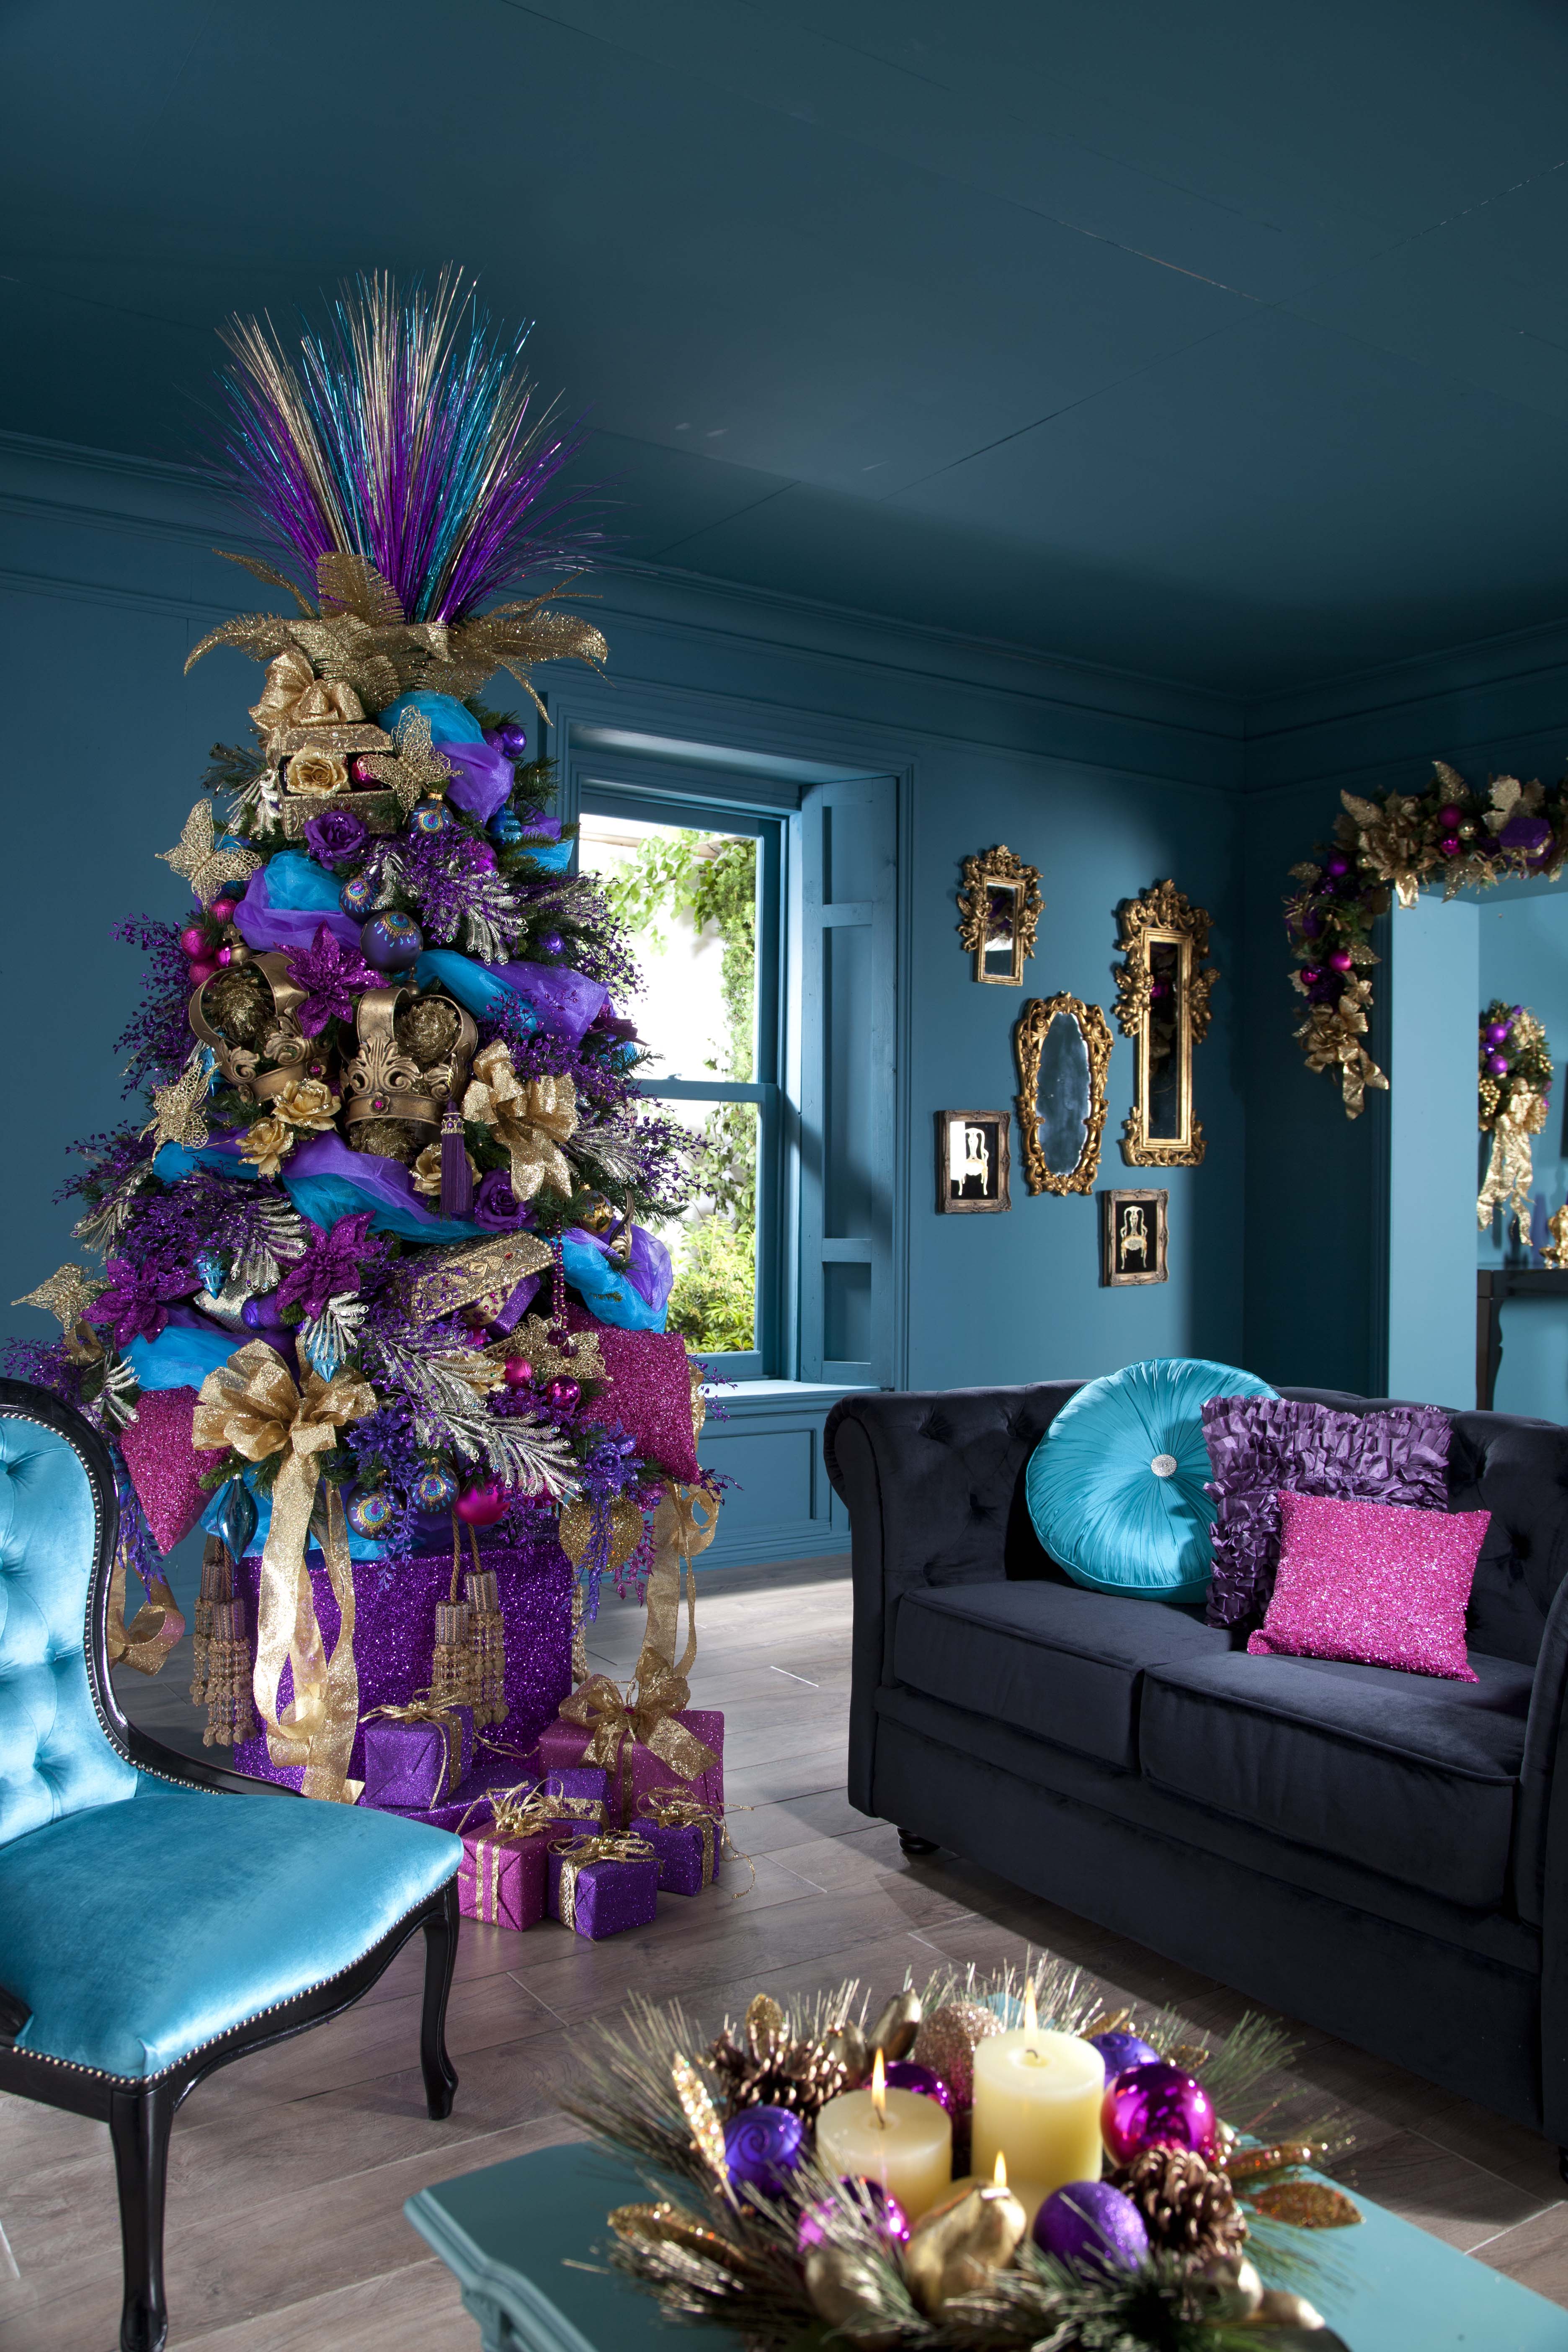 Indoor Decor: Ways to make your home festive during the ...